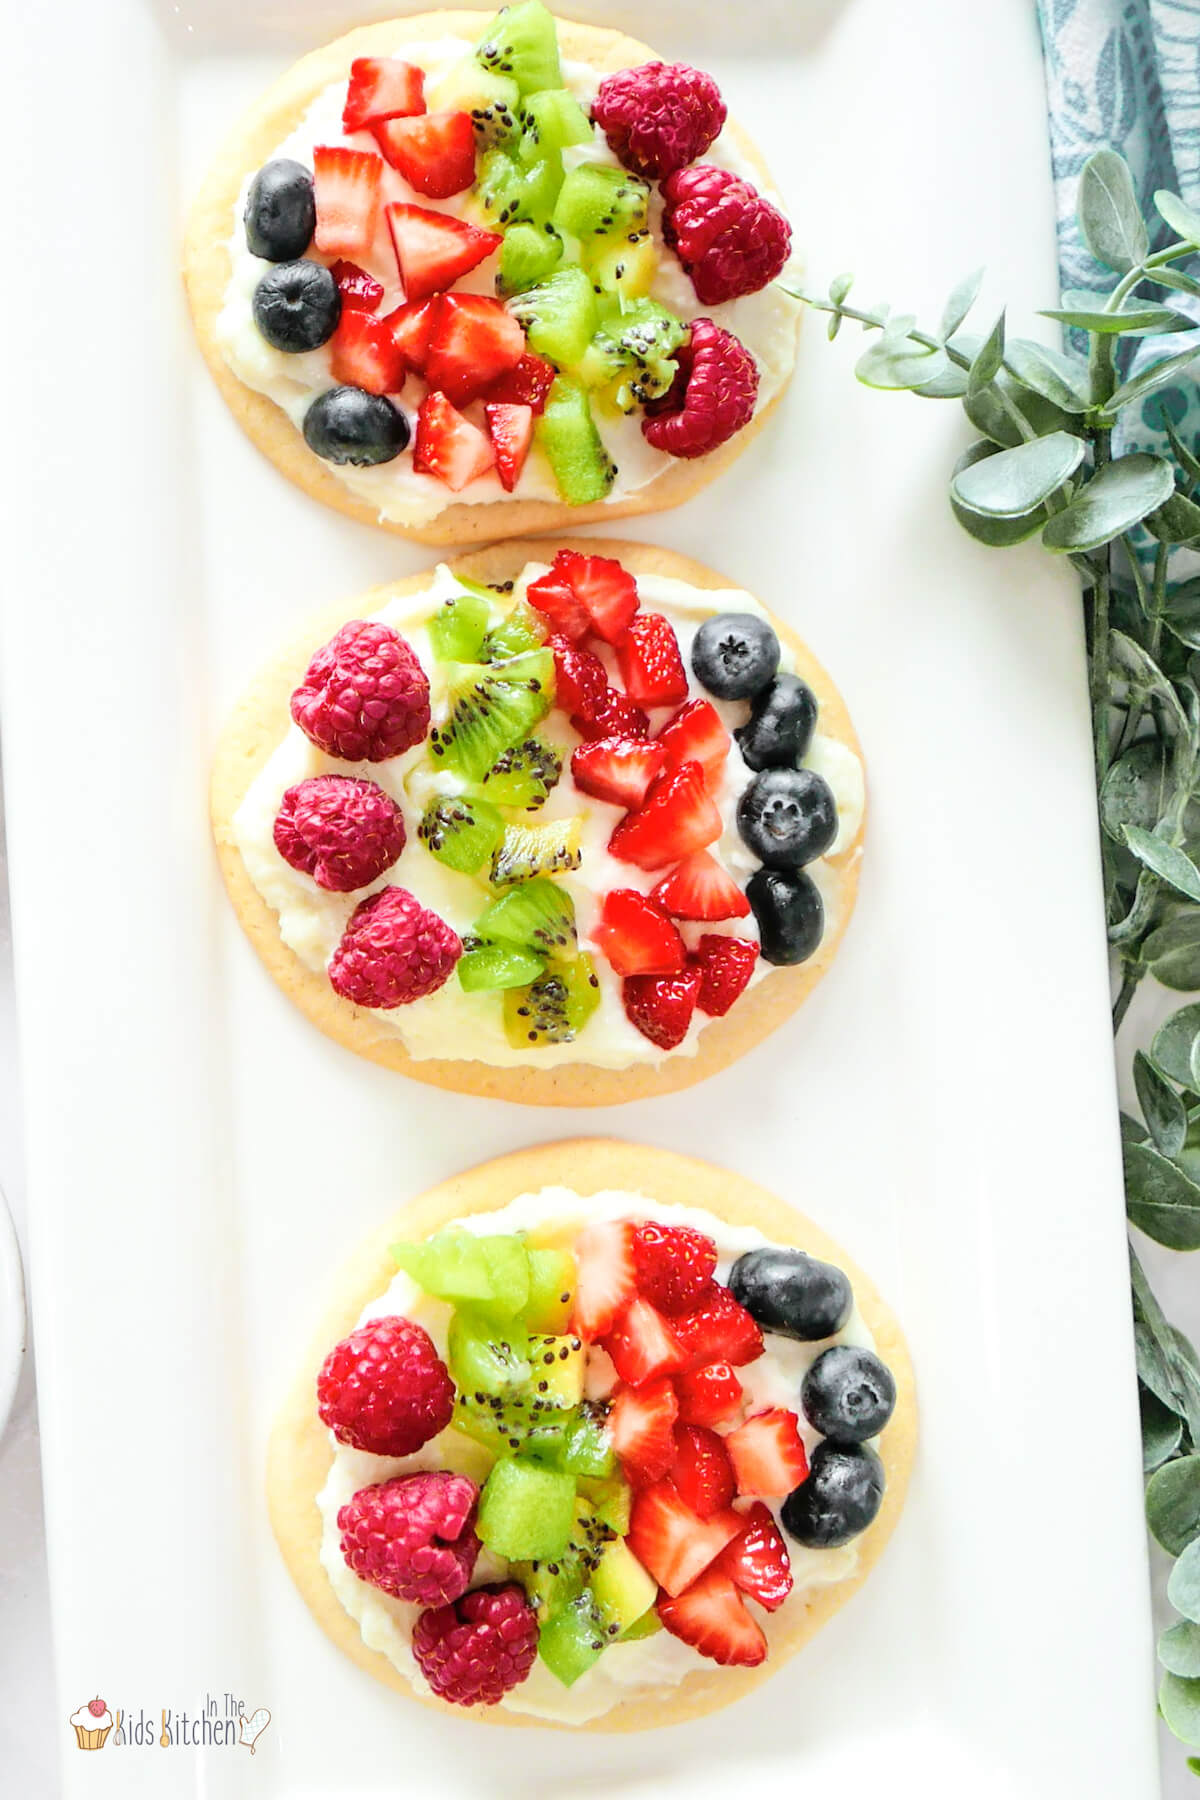 Mini Easter Egg Fruit Pizzas - In the Kids' Kitchen